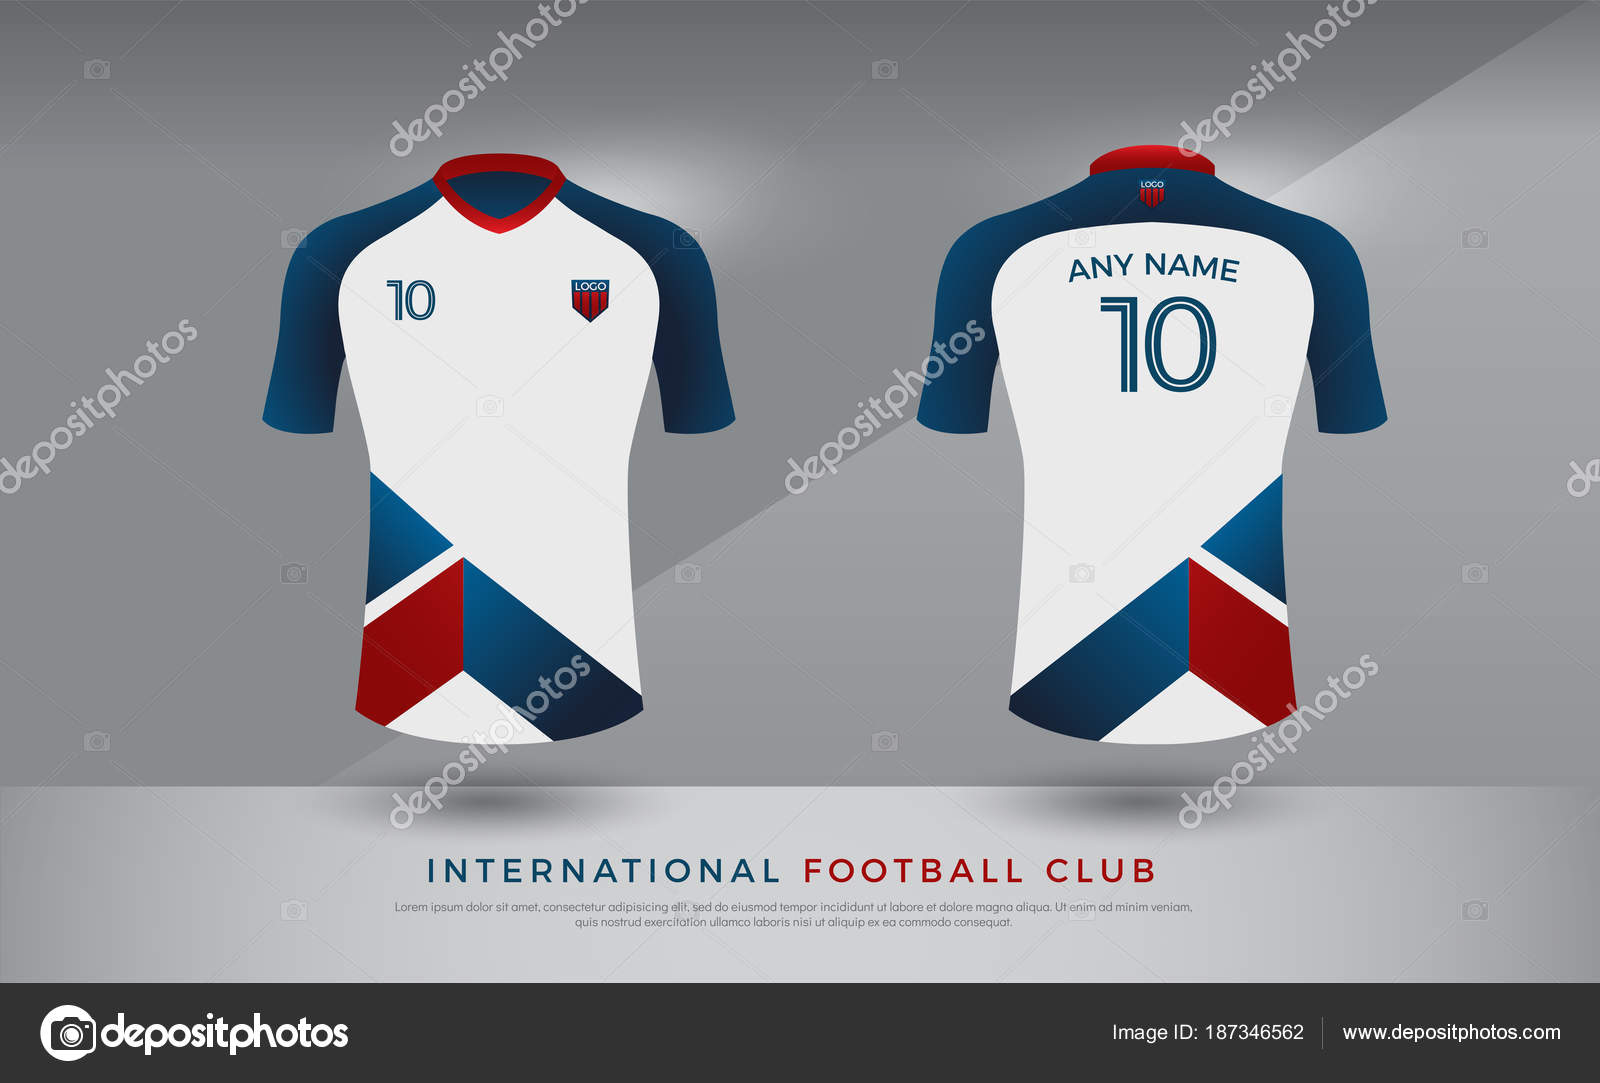 Download Soccer Shirt Design Uniform Set Soccer Kit Football Jersey Template Vector Image By C Geengraphy Vector Stock 187346562 Free Mockups